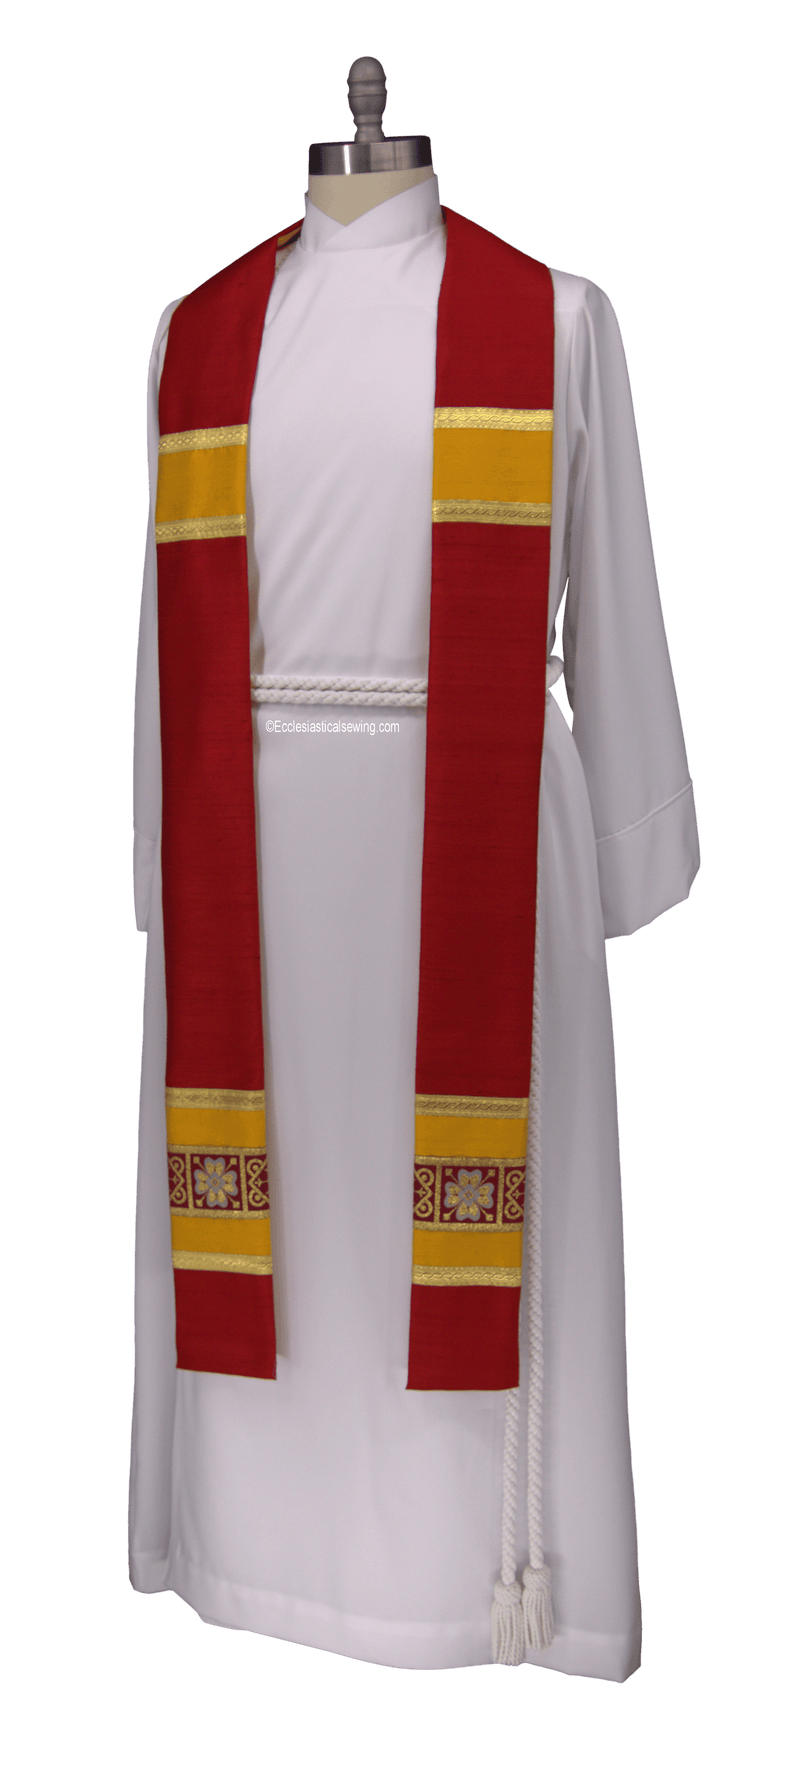 files/clergy-stole-in-the-saint-ignatius-of-antioch-collection-ecclesiastical-sewing-2-31789964558592.png